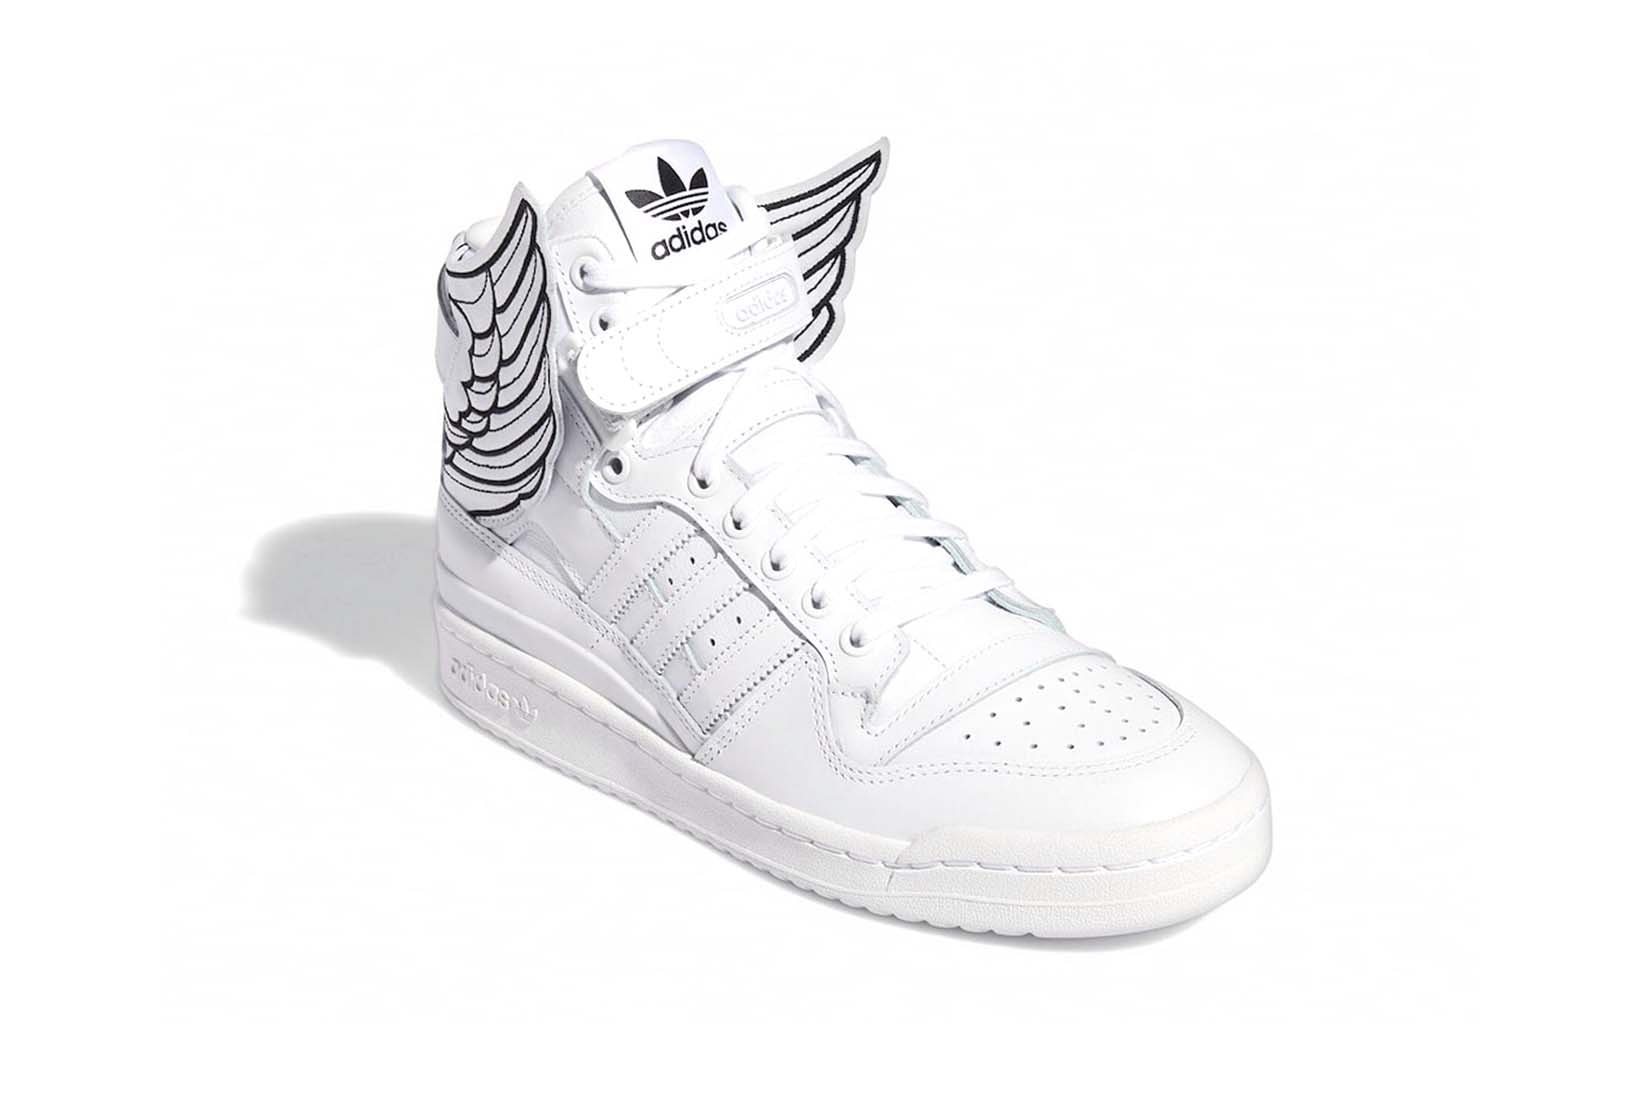 Jeremy Scott adidas Forum Hi Wings 4.0 White Price Release Date Collaboration